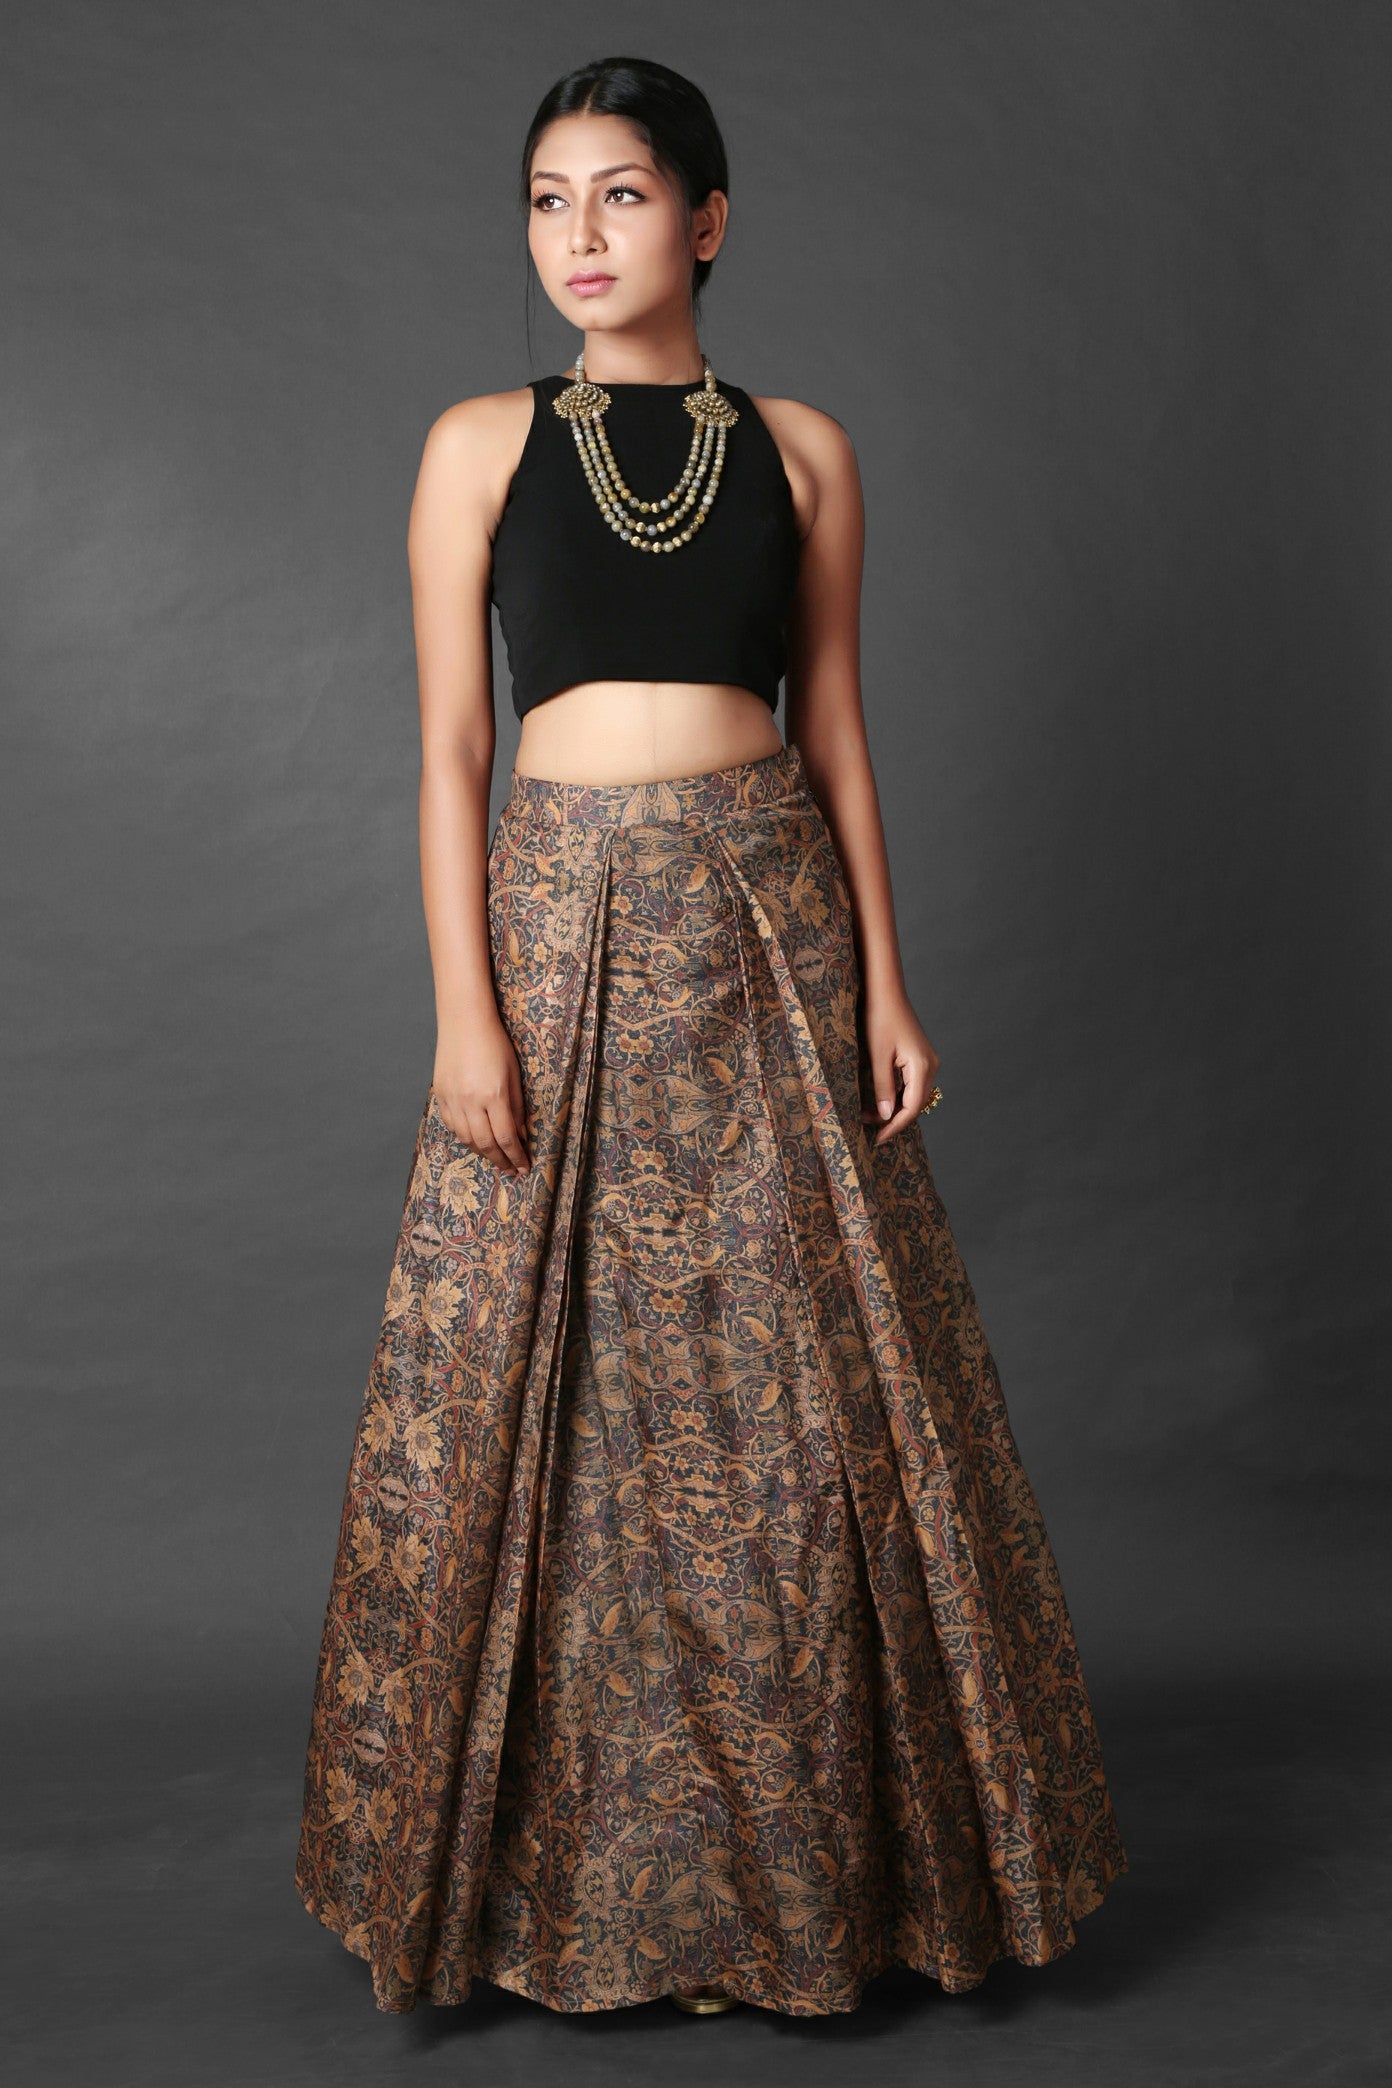 Contemporary Print Lehenga - Indian Clothing in Denver, CO, Aurora, CO, Boulder, CO, Fort Collins, CO, Colorado Springs, CO, Parker, CO, Highlands Ranch, CO, Cherry Creek, CO, Centennial, CO, and Longmont, CO. Nationwide shipping USA - India Fashion X